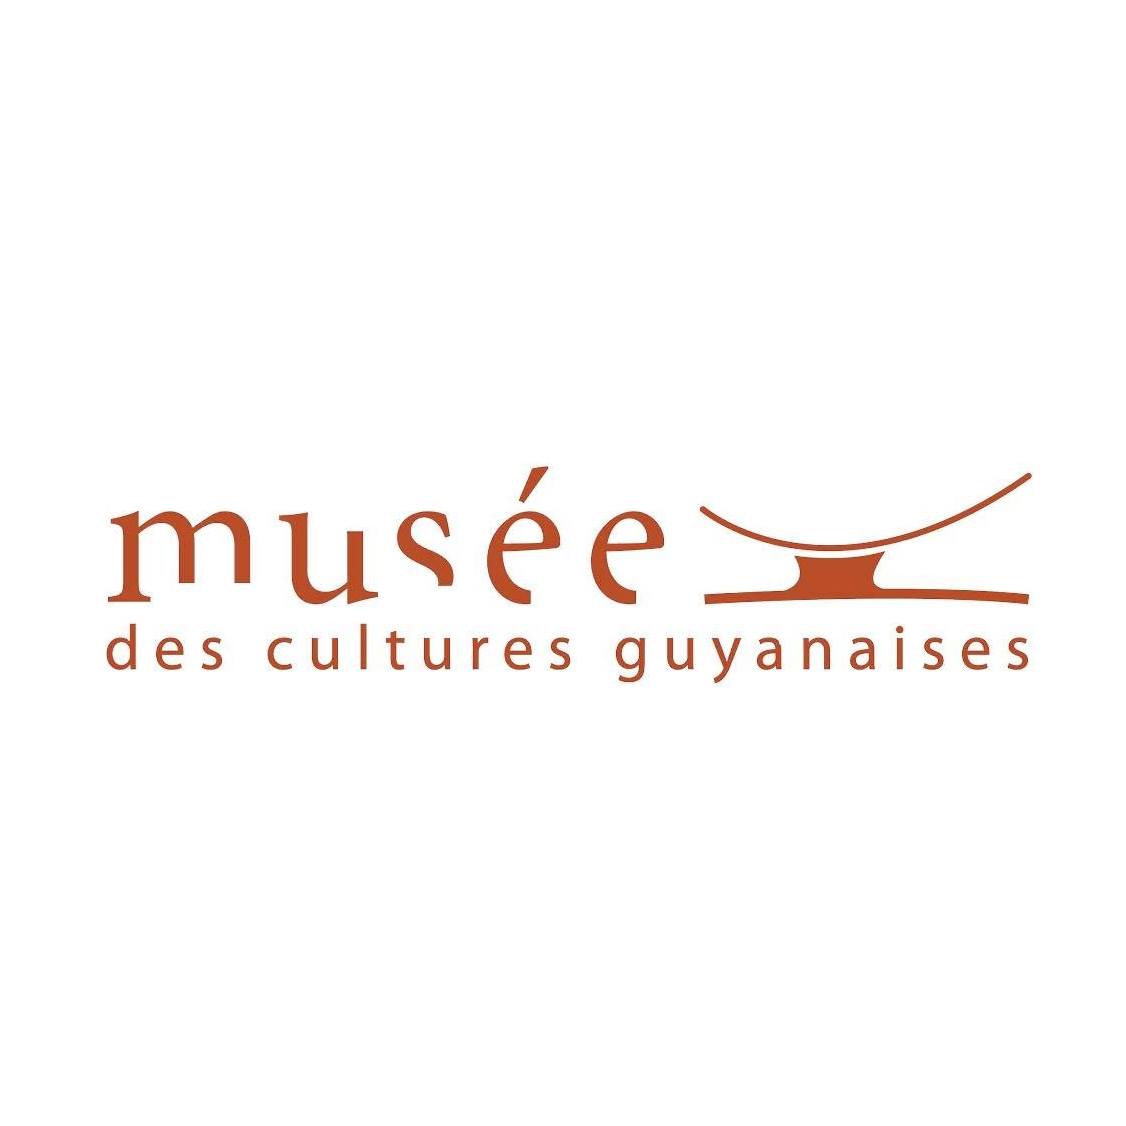 musee cultures guyanaises